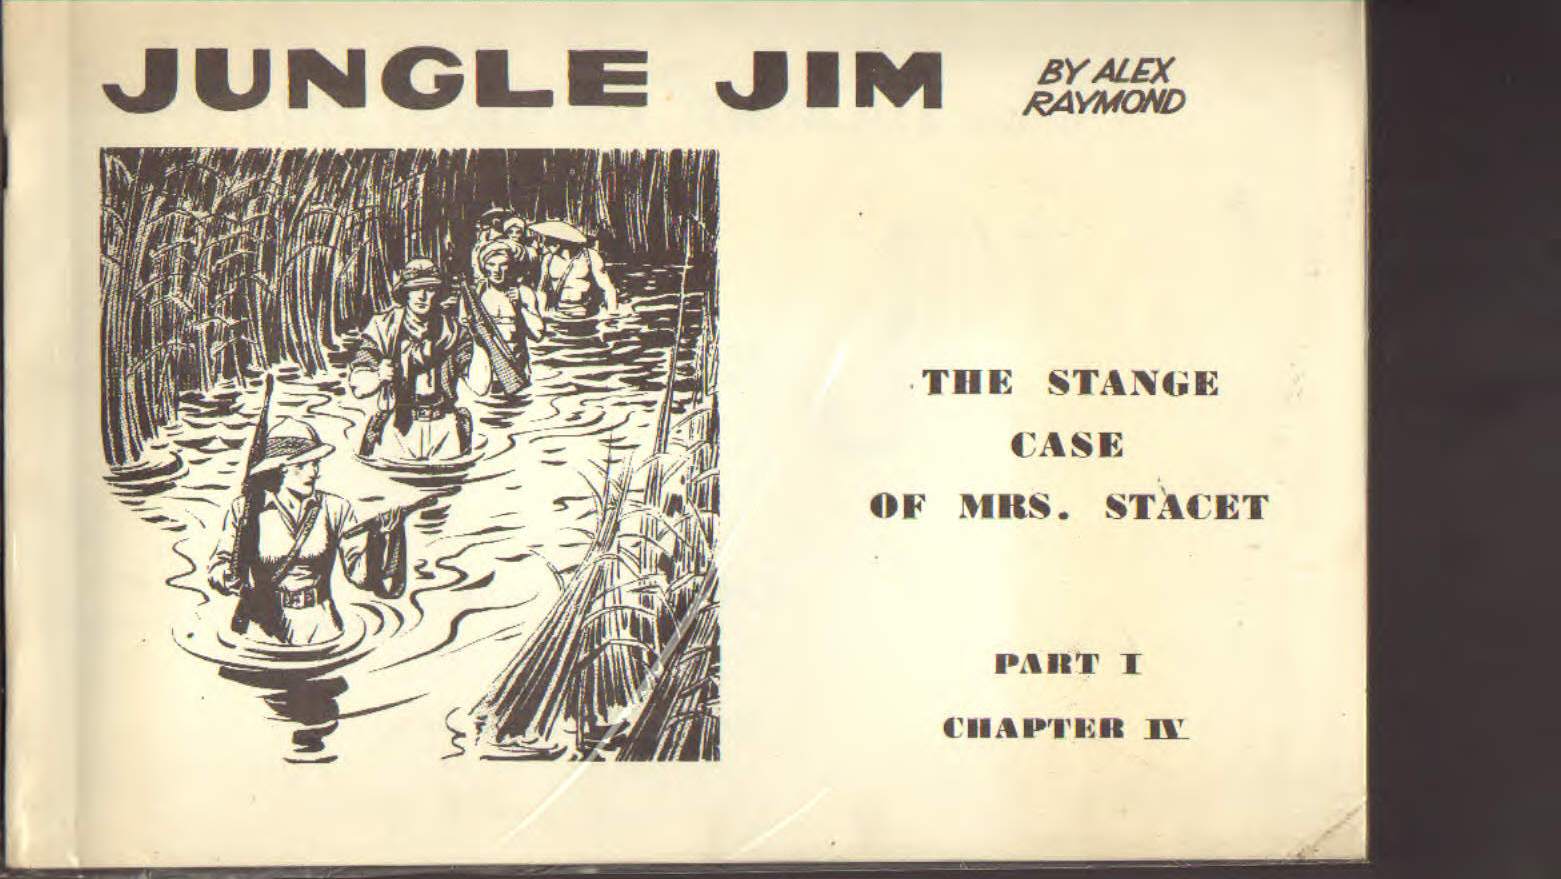 Jungle Jim by Alex Raymond the stange case of mrs Stacet